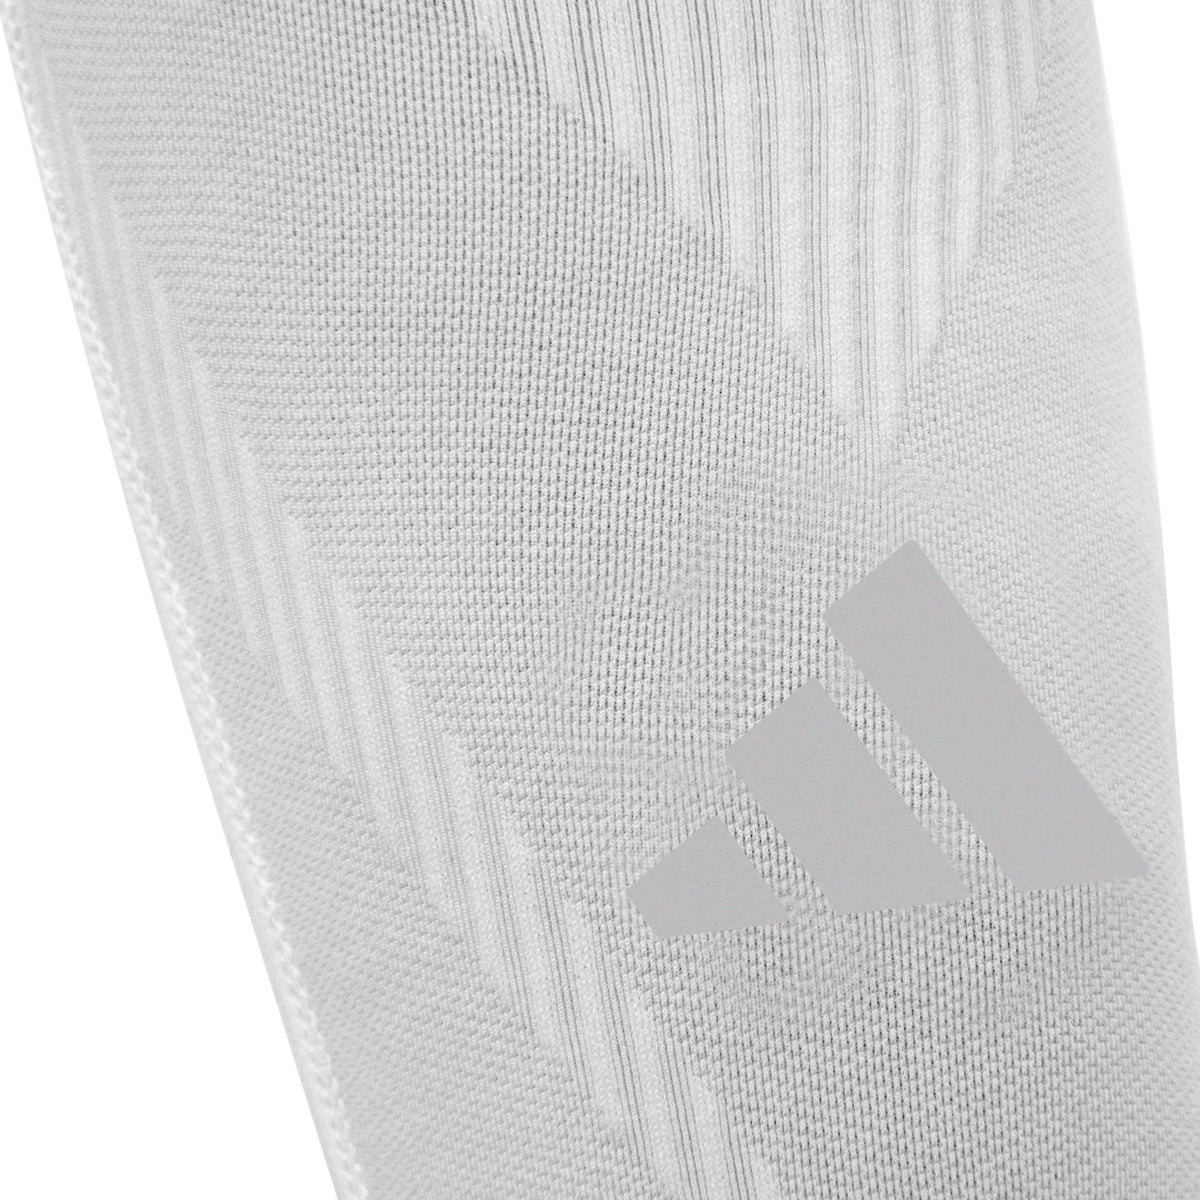 Adidas compression calf sleeve - $65.00 Available at all JR White